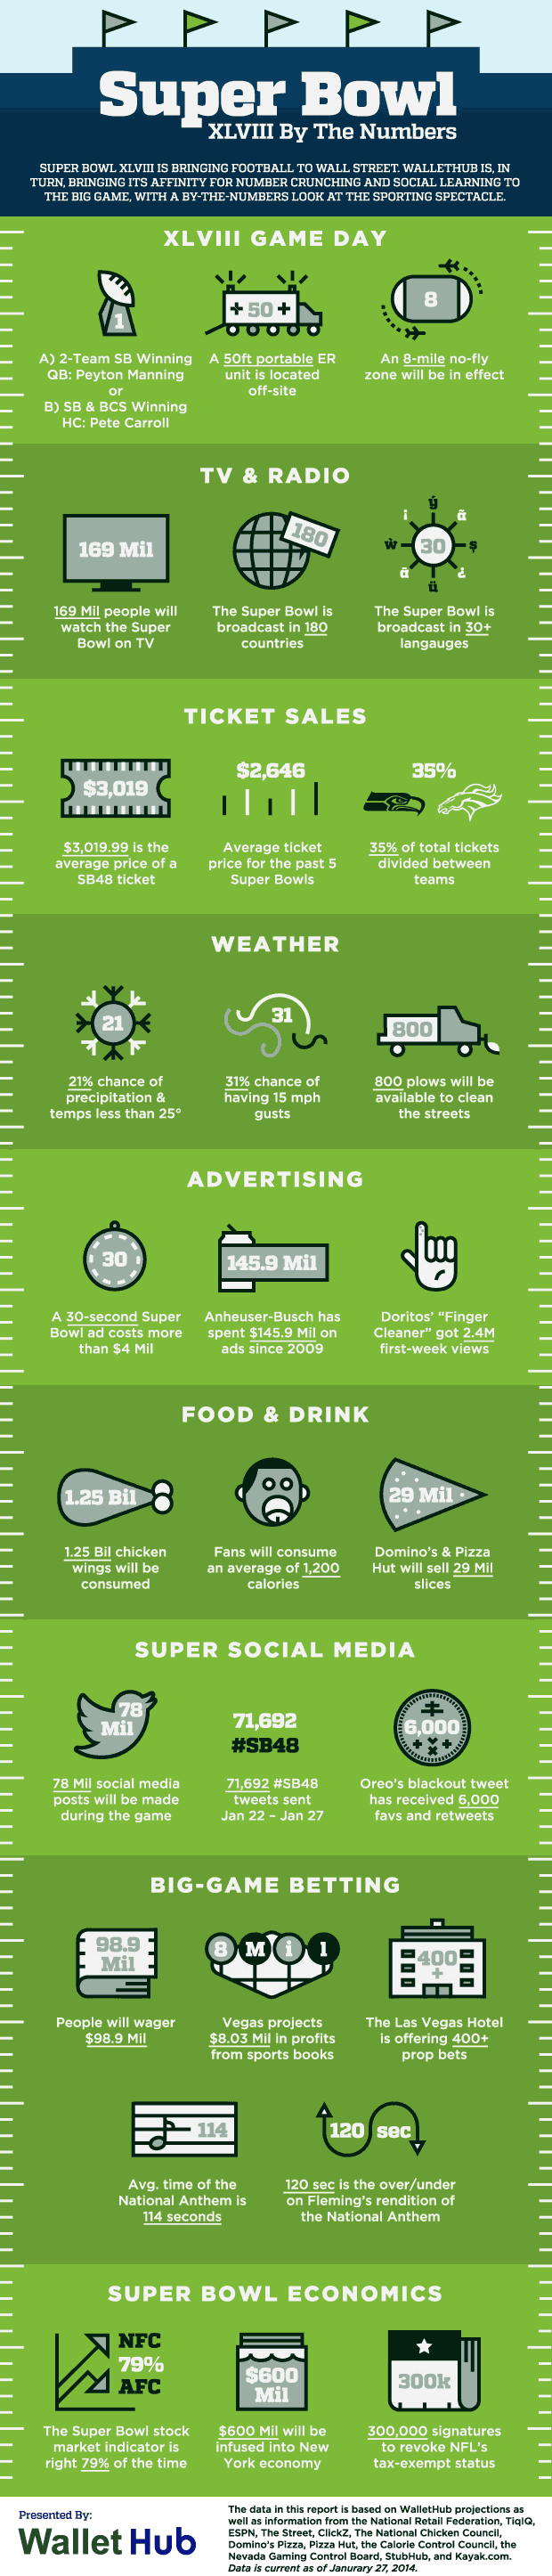 Infographic: Super Bowl XLVIII by the numbers